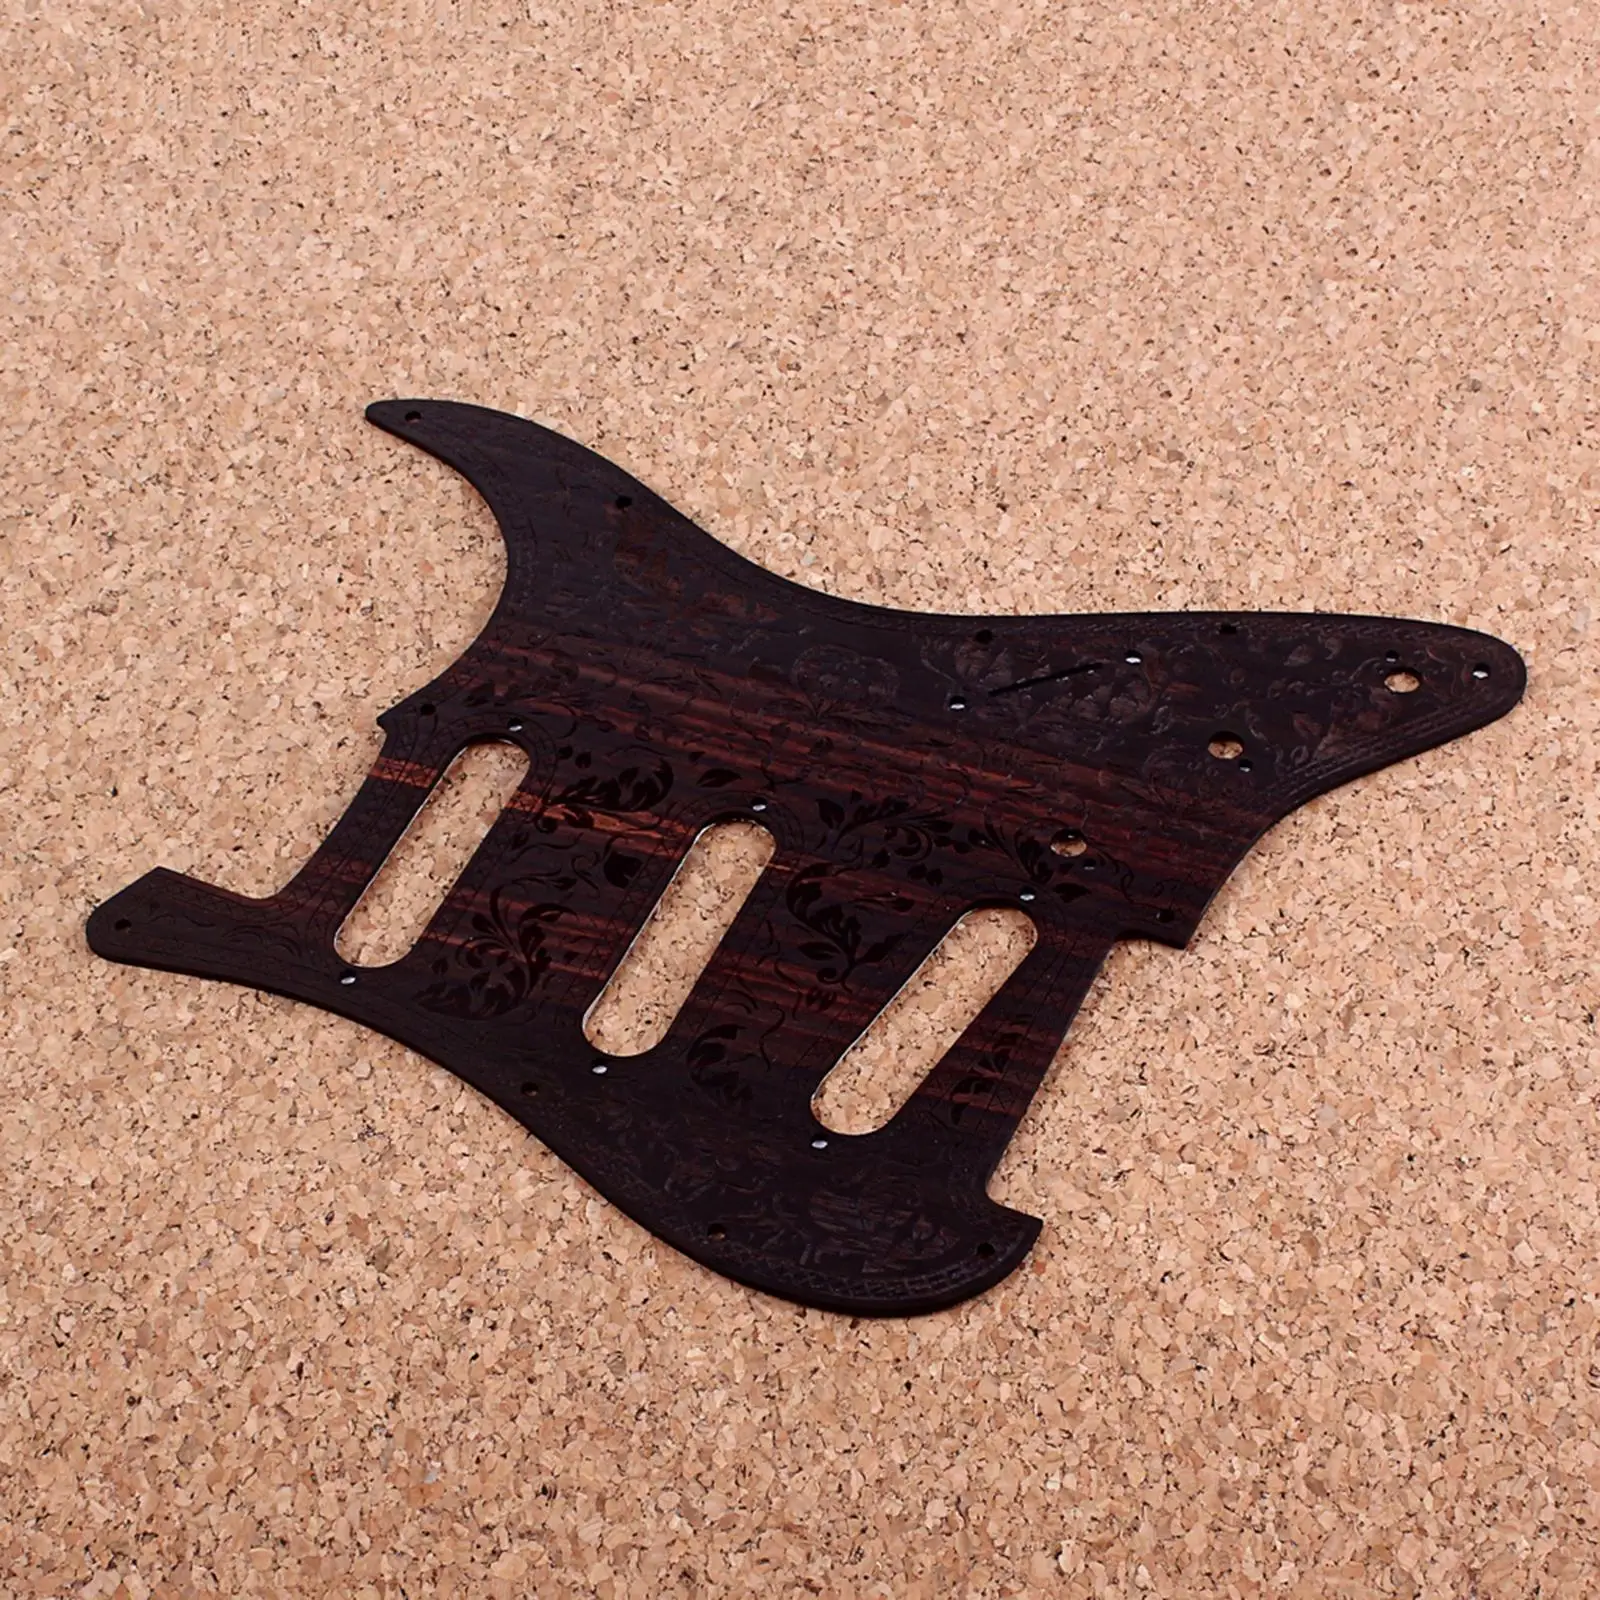 Vintage Carved Rosewood 8 Hole Electric Guitar Pickguard for ST Accs Brown